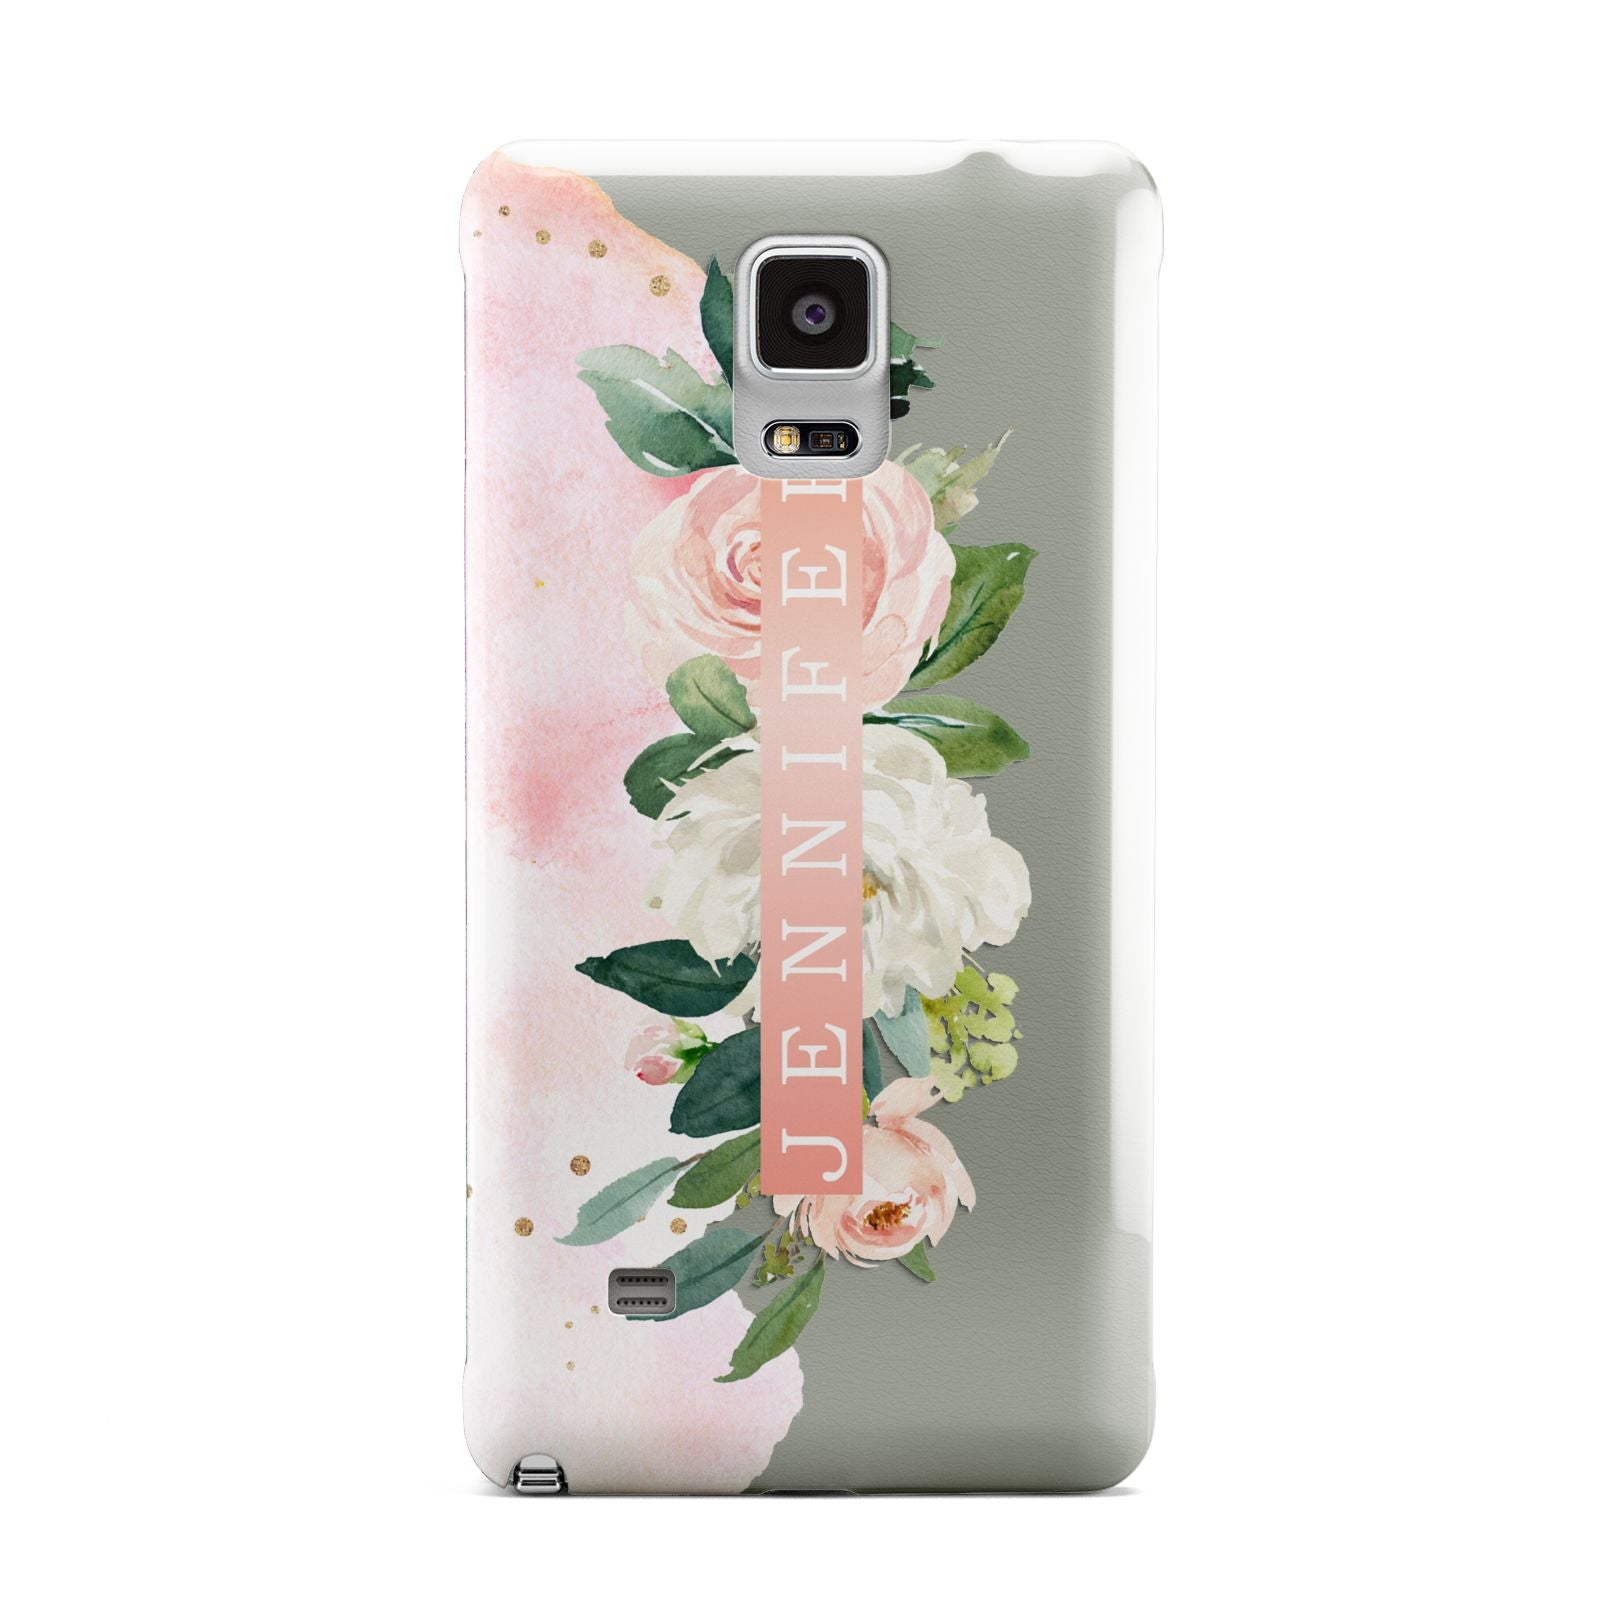 Blush Pink Personalised Name Floral Samsung Galaxy Note 4 Case